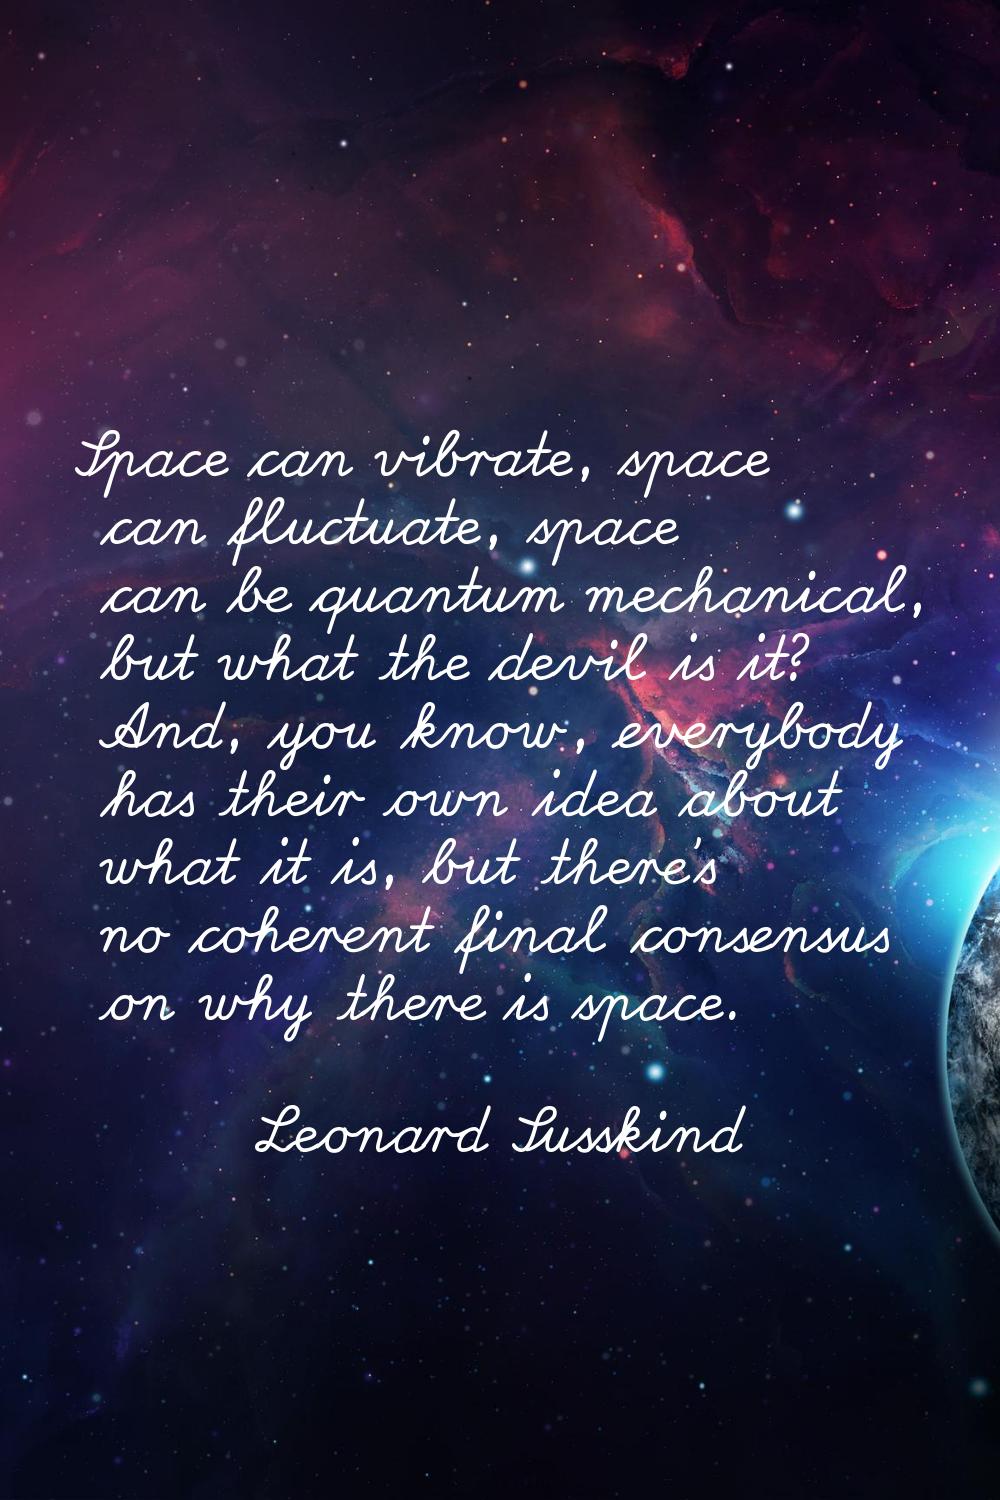 Space can vibrate, space can fluctuate, space can be quantum mechanical, but what the devil is it? 